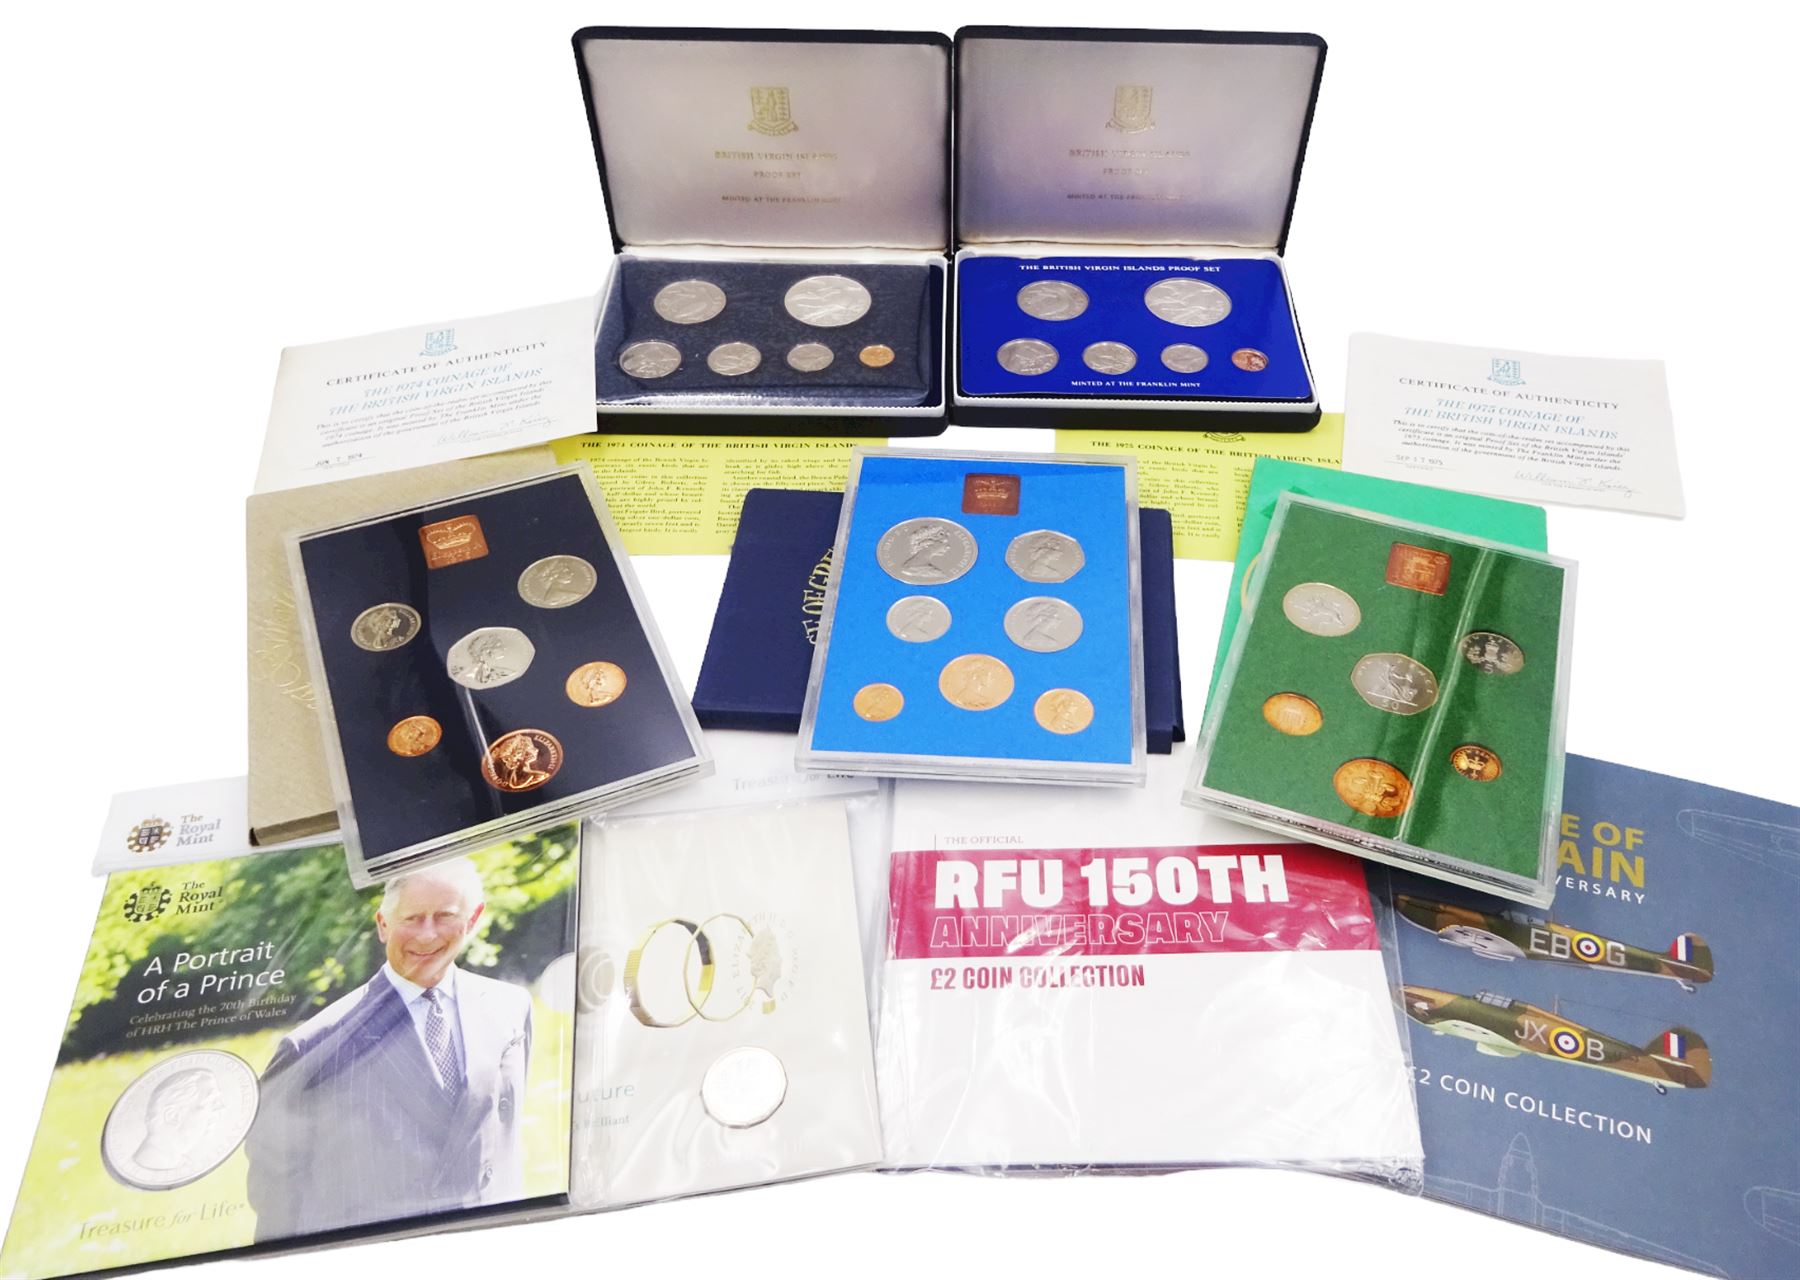 Two The Franklin Mint 'Coinage of The British Virgin Islands' proof sets